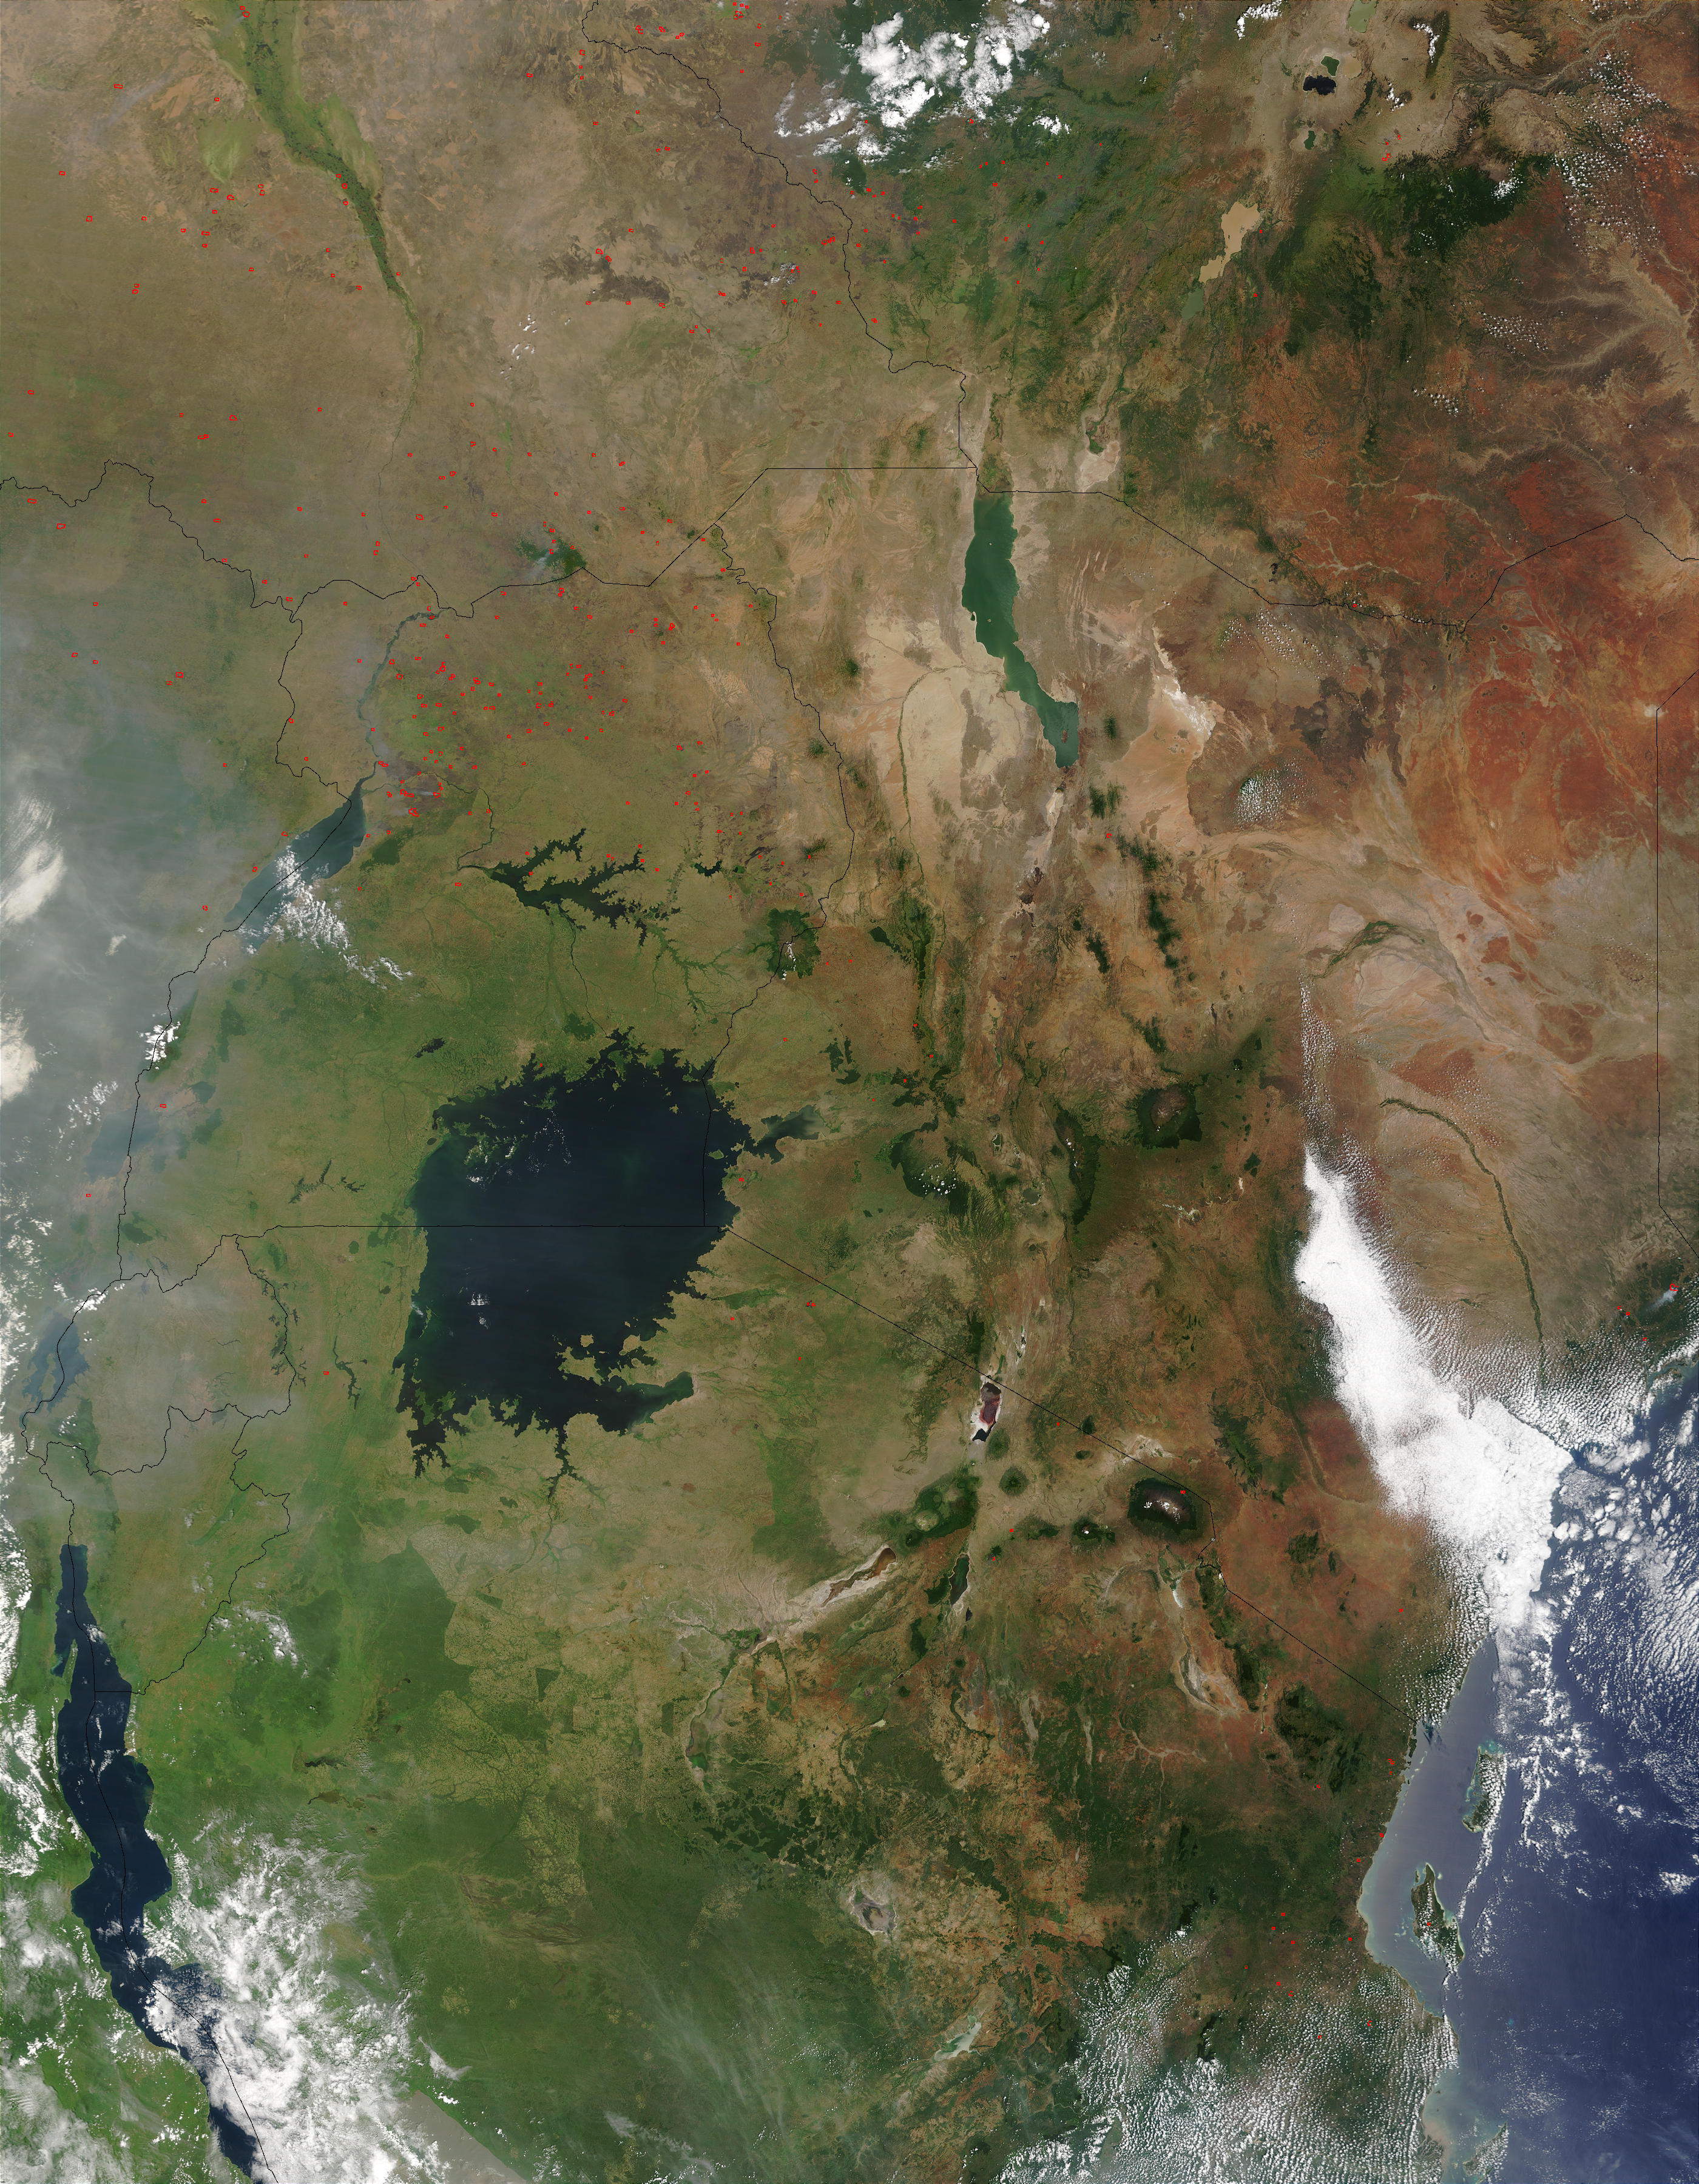 Fires in Eastern Africa Near Lake Victoria - related image preview